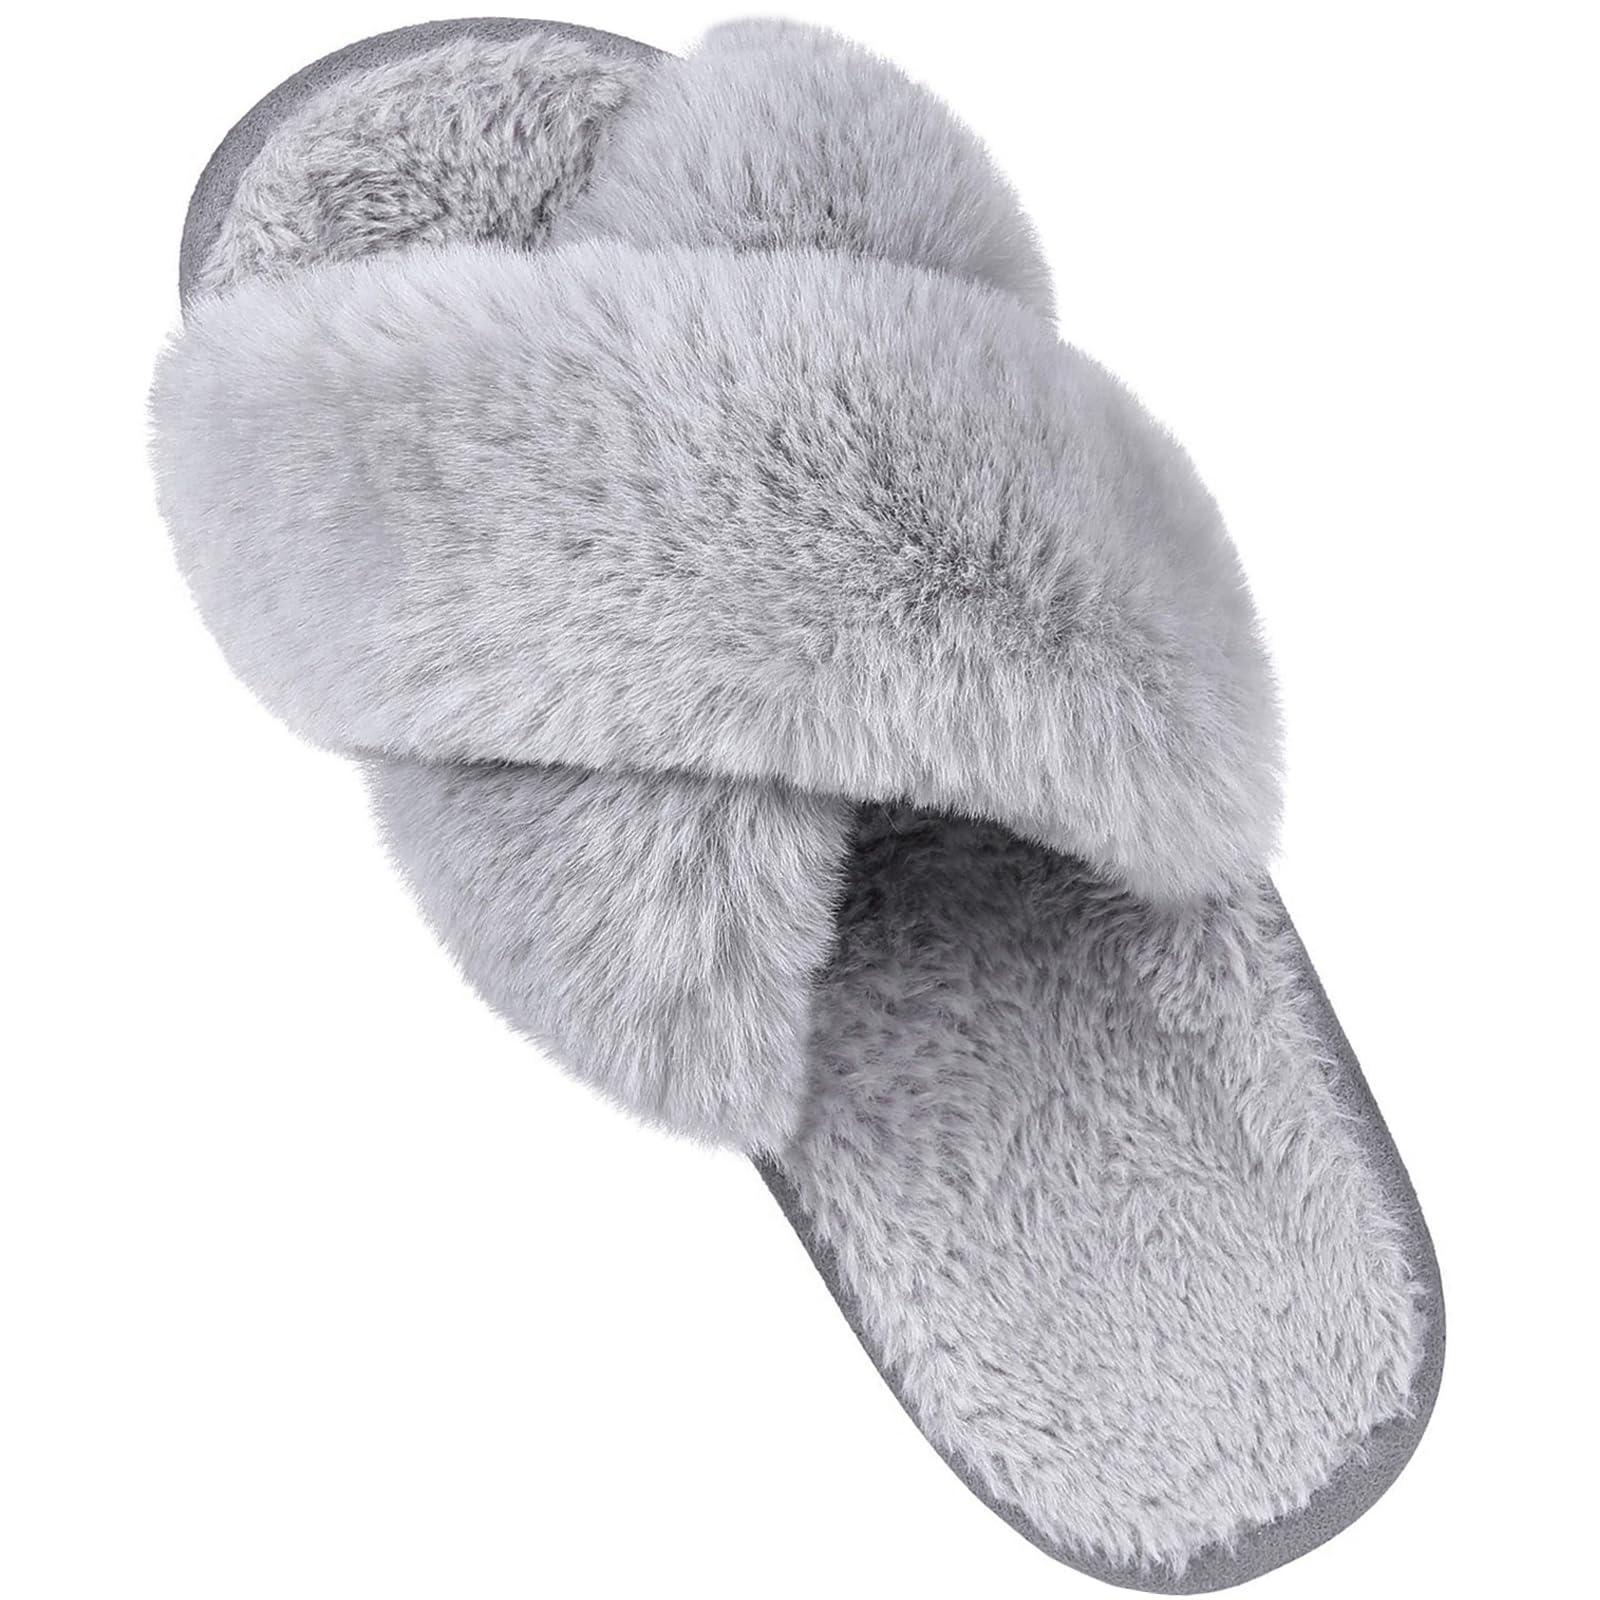 Adult Cotton Slippers Slippers Home Slippers Plush Slippers Animal ...